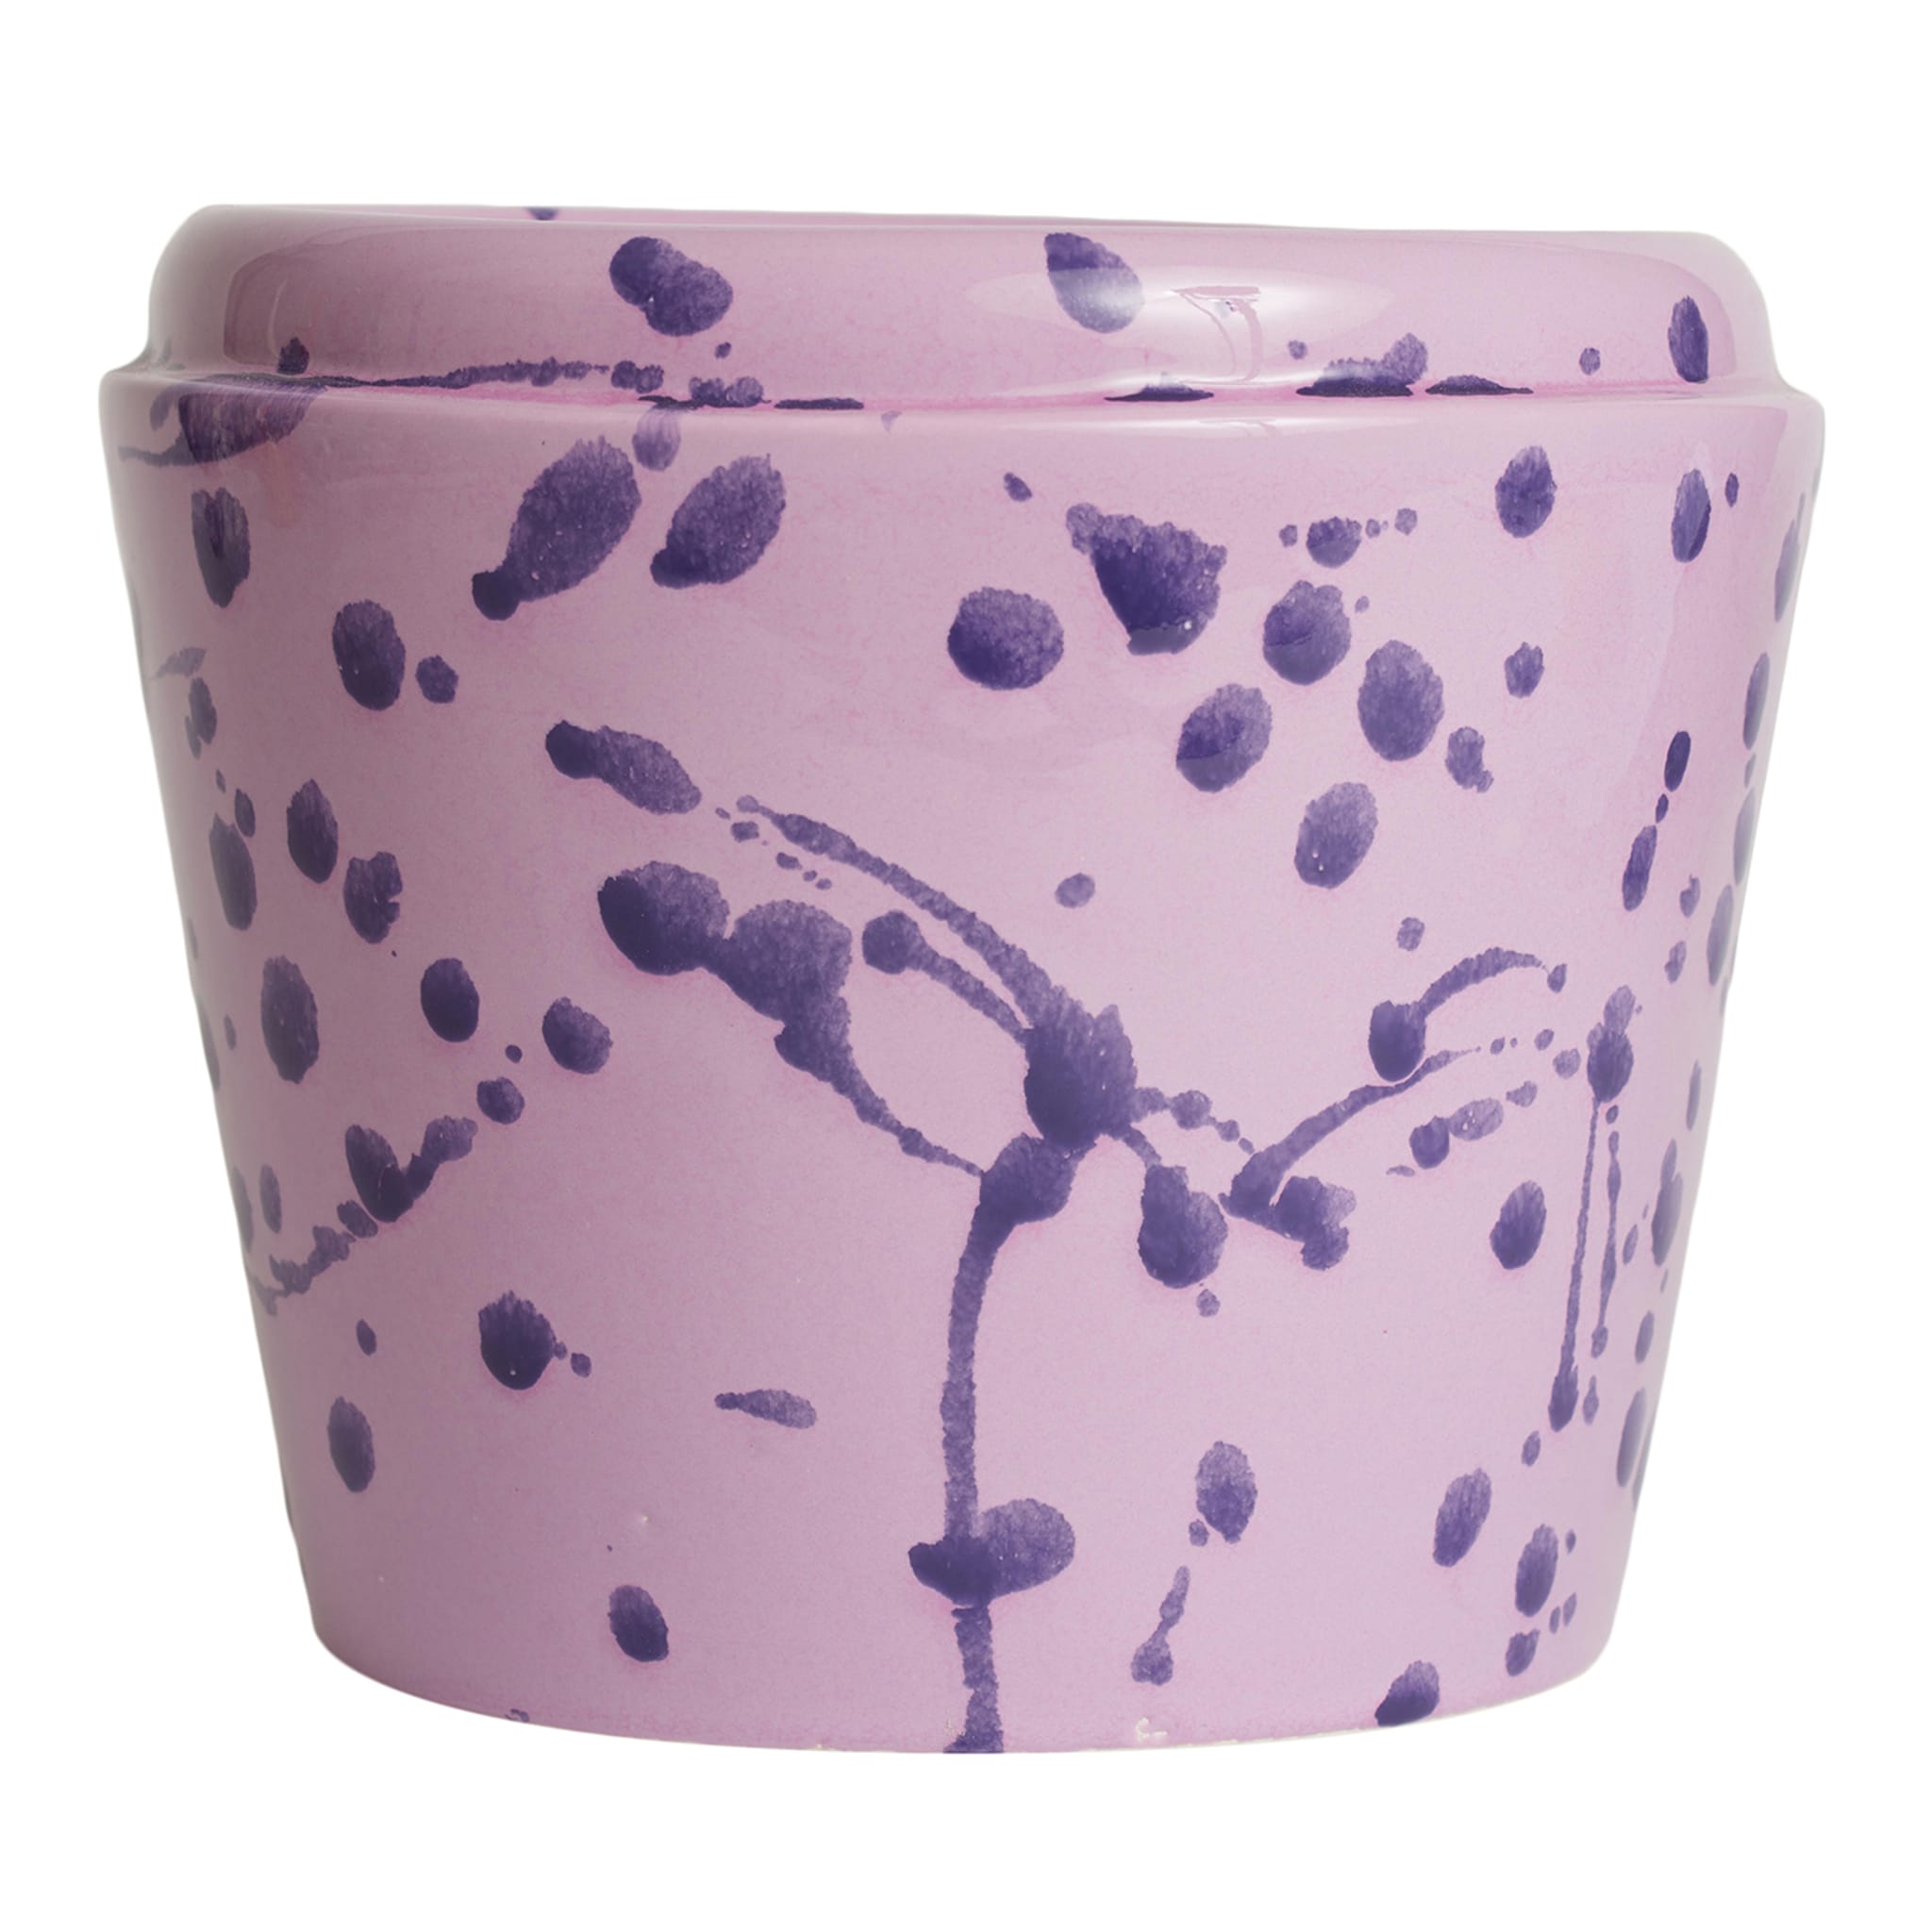 Lilac and Violet Ceramic Cachepot Vase - Main view